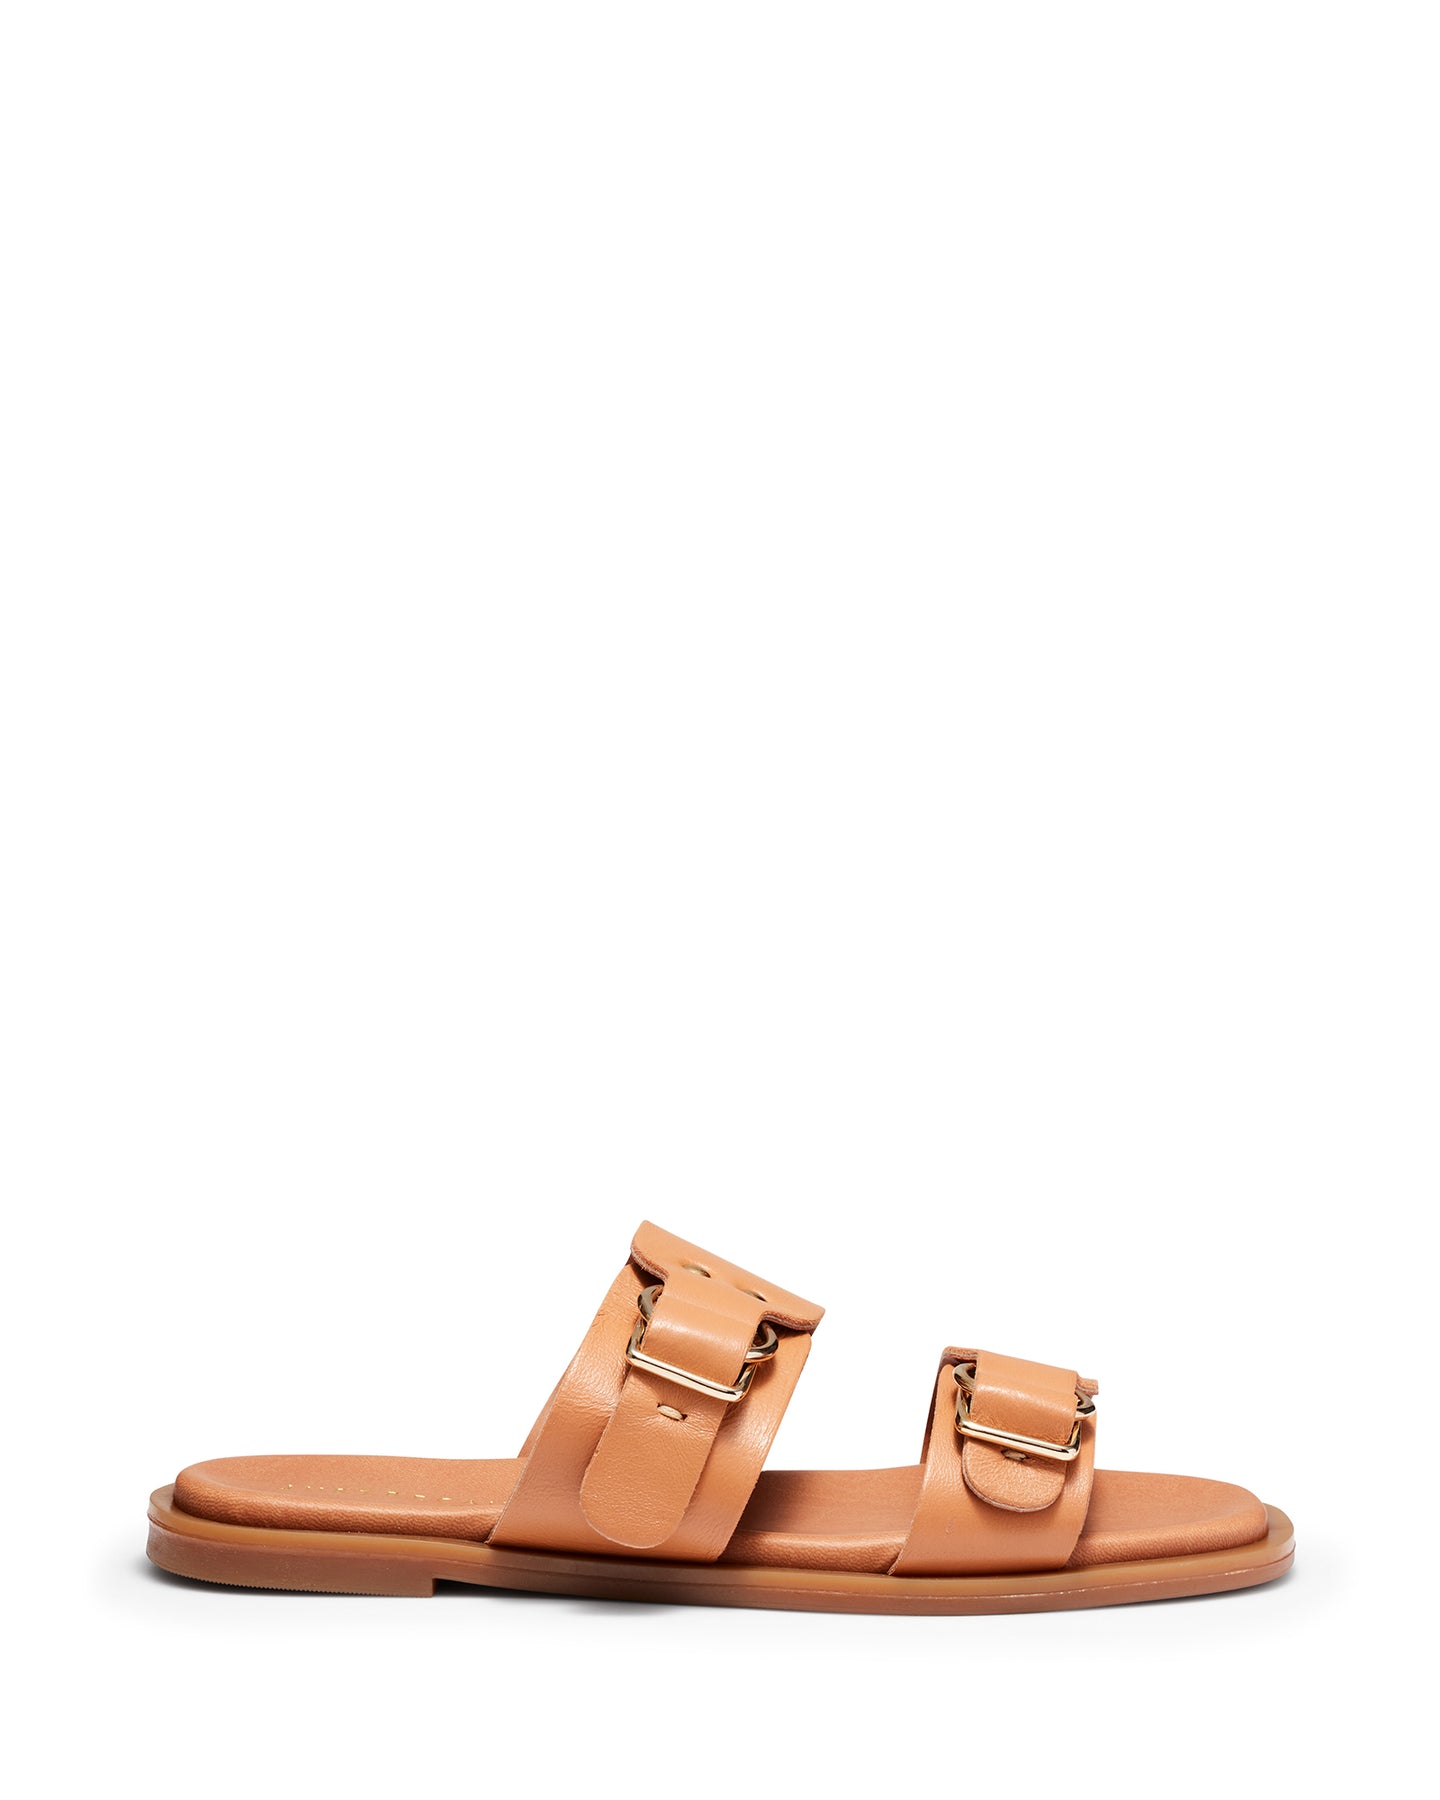 Just Because Shoes Danae Caramel | Leather Sandals | Slides | Flats 